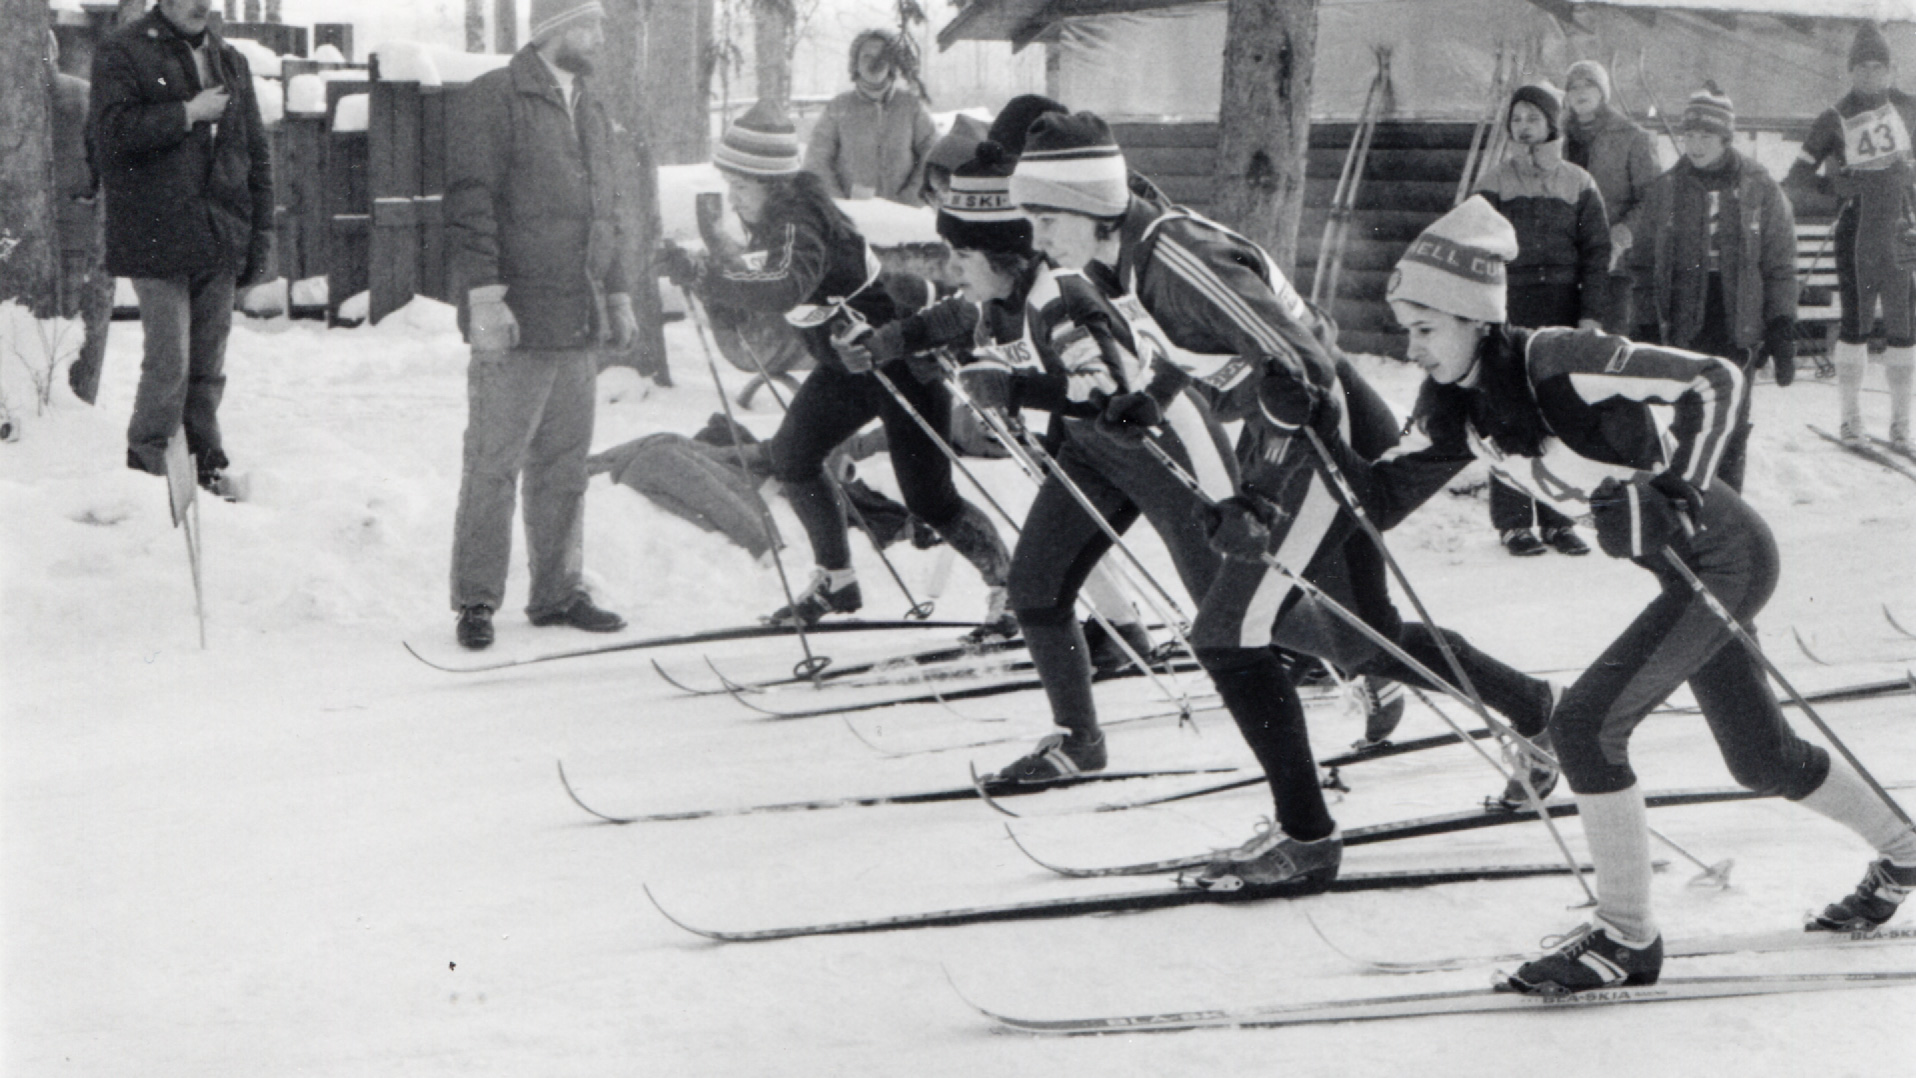 The start of the 1978 Top of the World Loppet